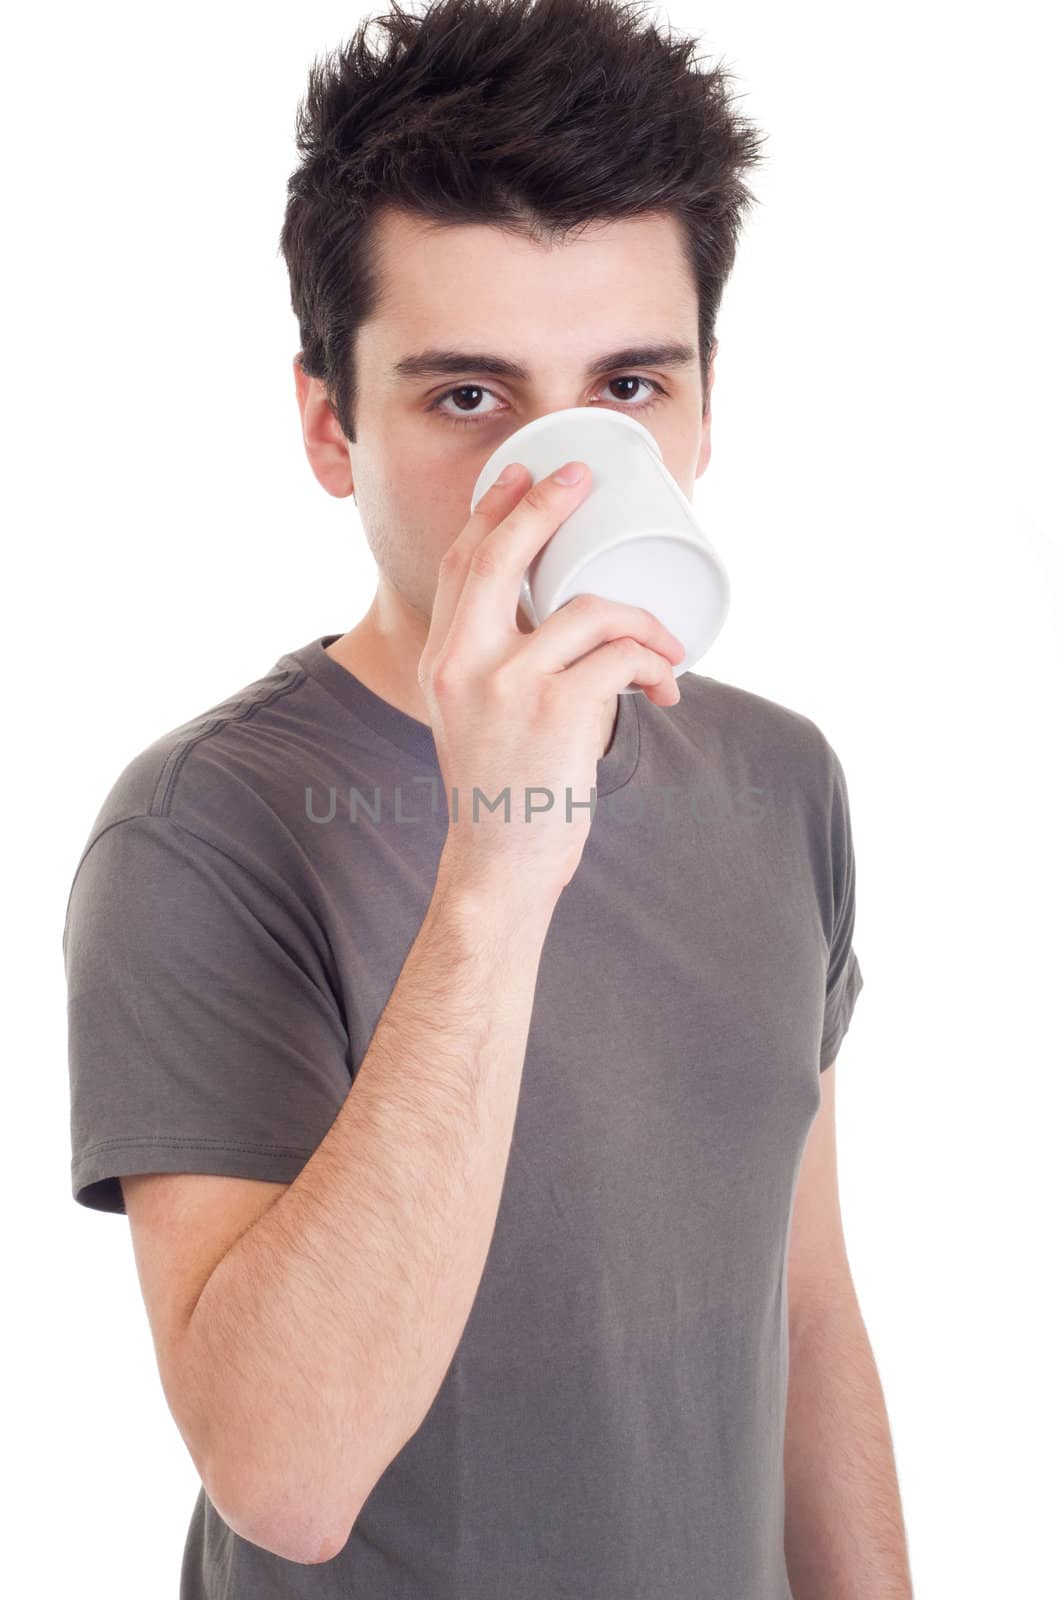 handsome casual man drinking coffee/tea mug (isolated on white background)